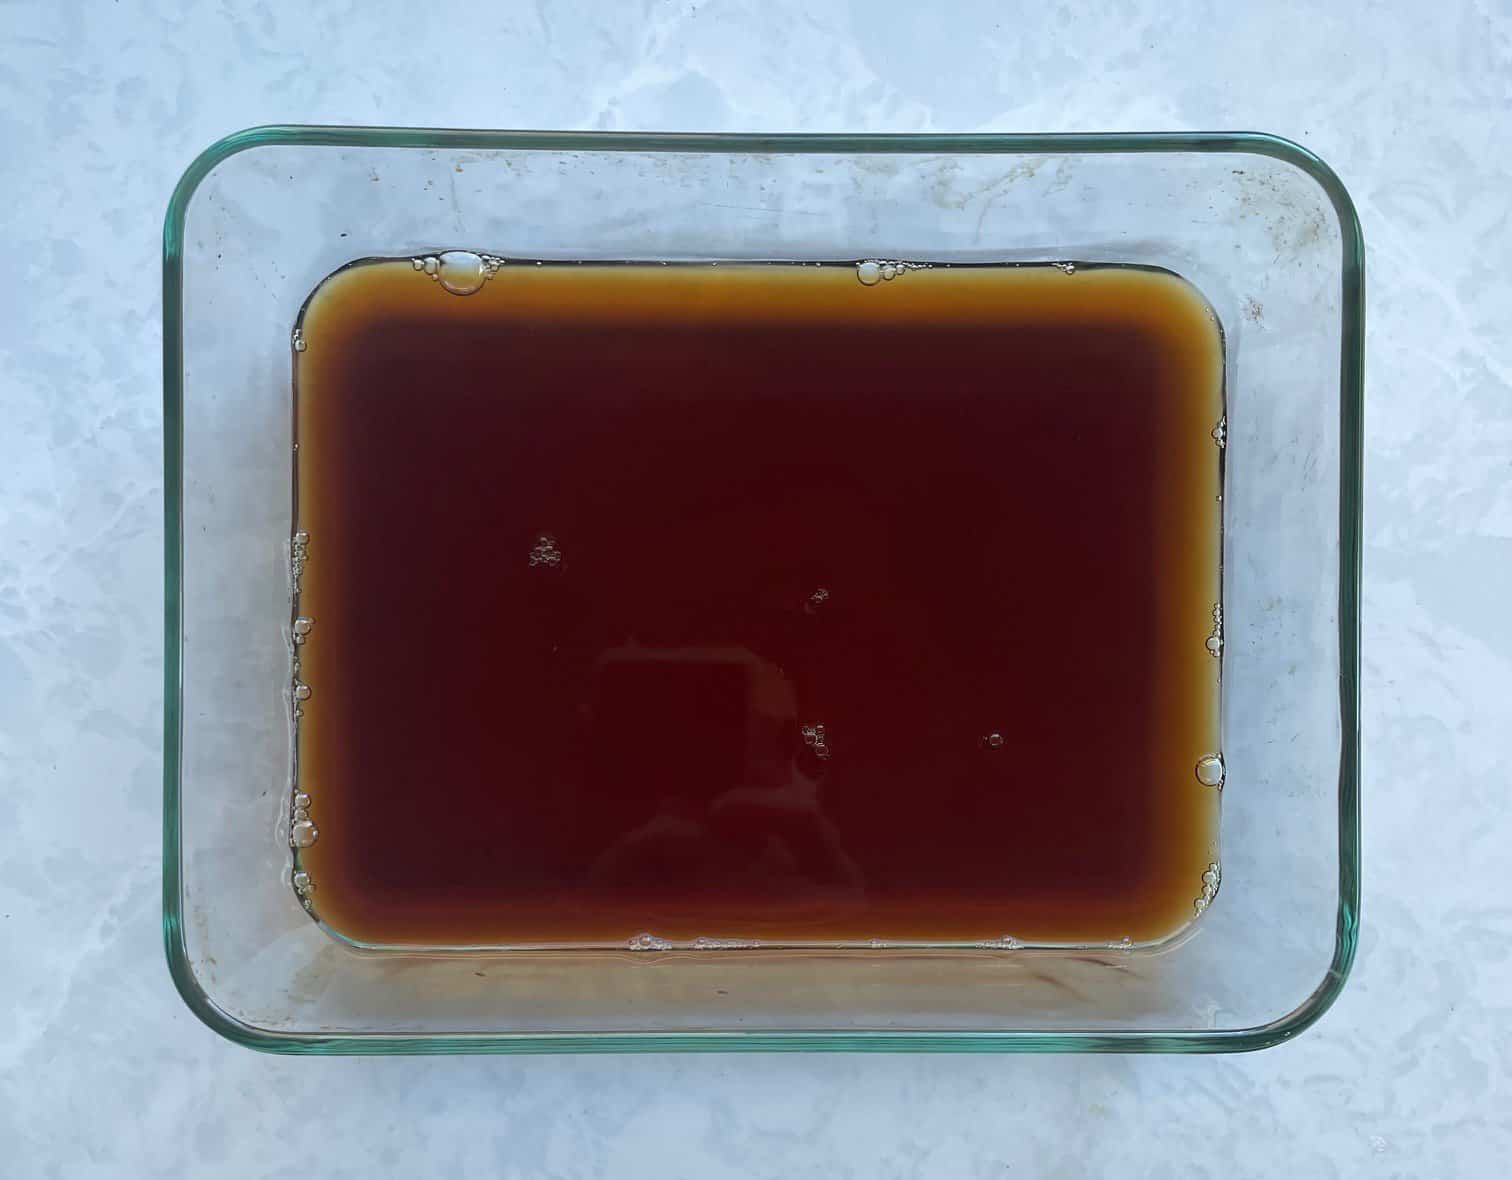 coffee syrup in a flat glass baking pan.